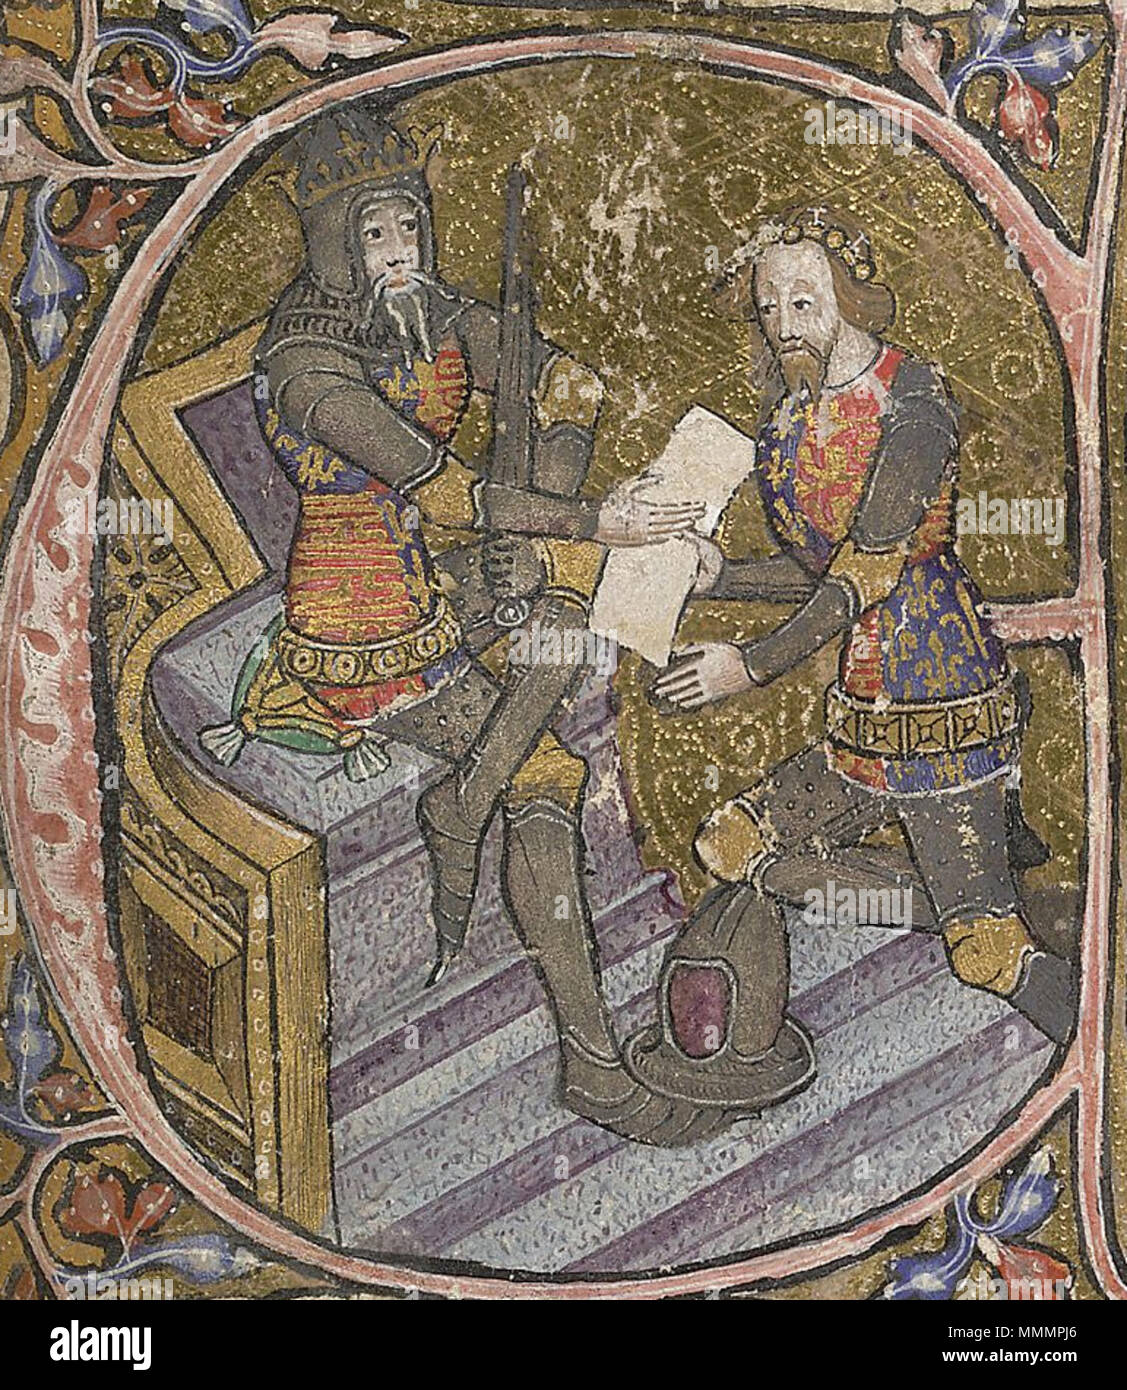 English: 'Edward The Black Prince receives the grant of Aquitaine from his  father King Edward III' Initial letter 'E' on a page of illuminated  manuscript, date: 1390; British Library, shelfmark: Cotton